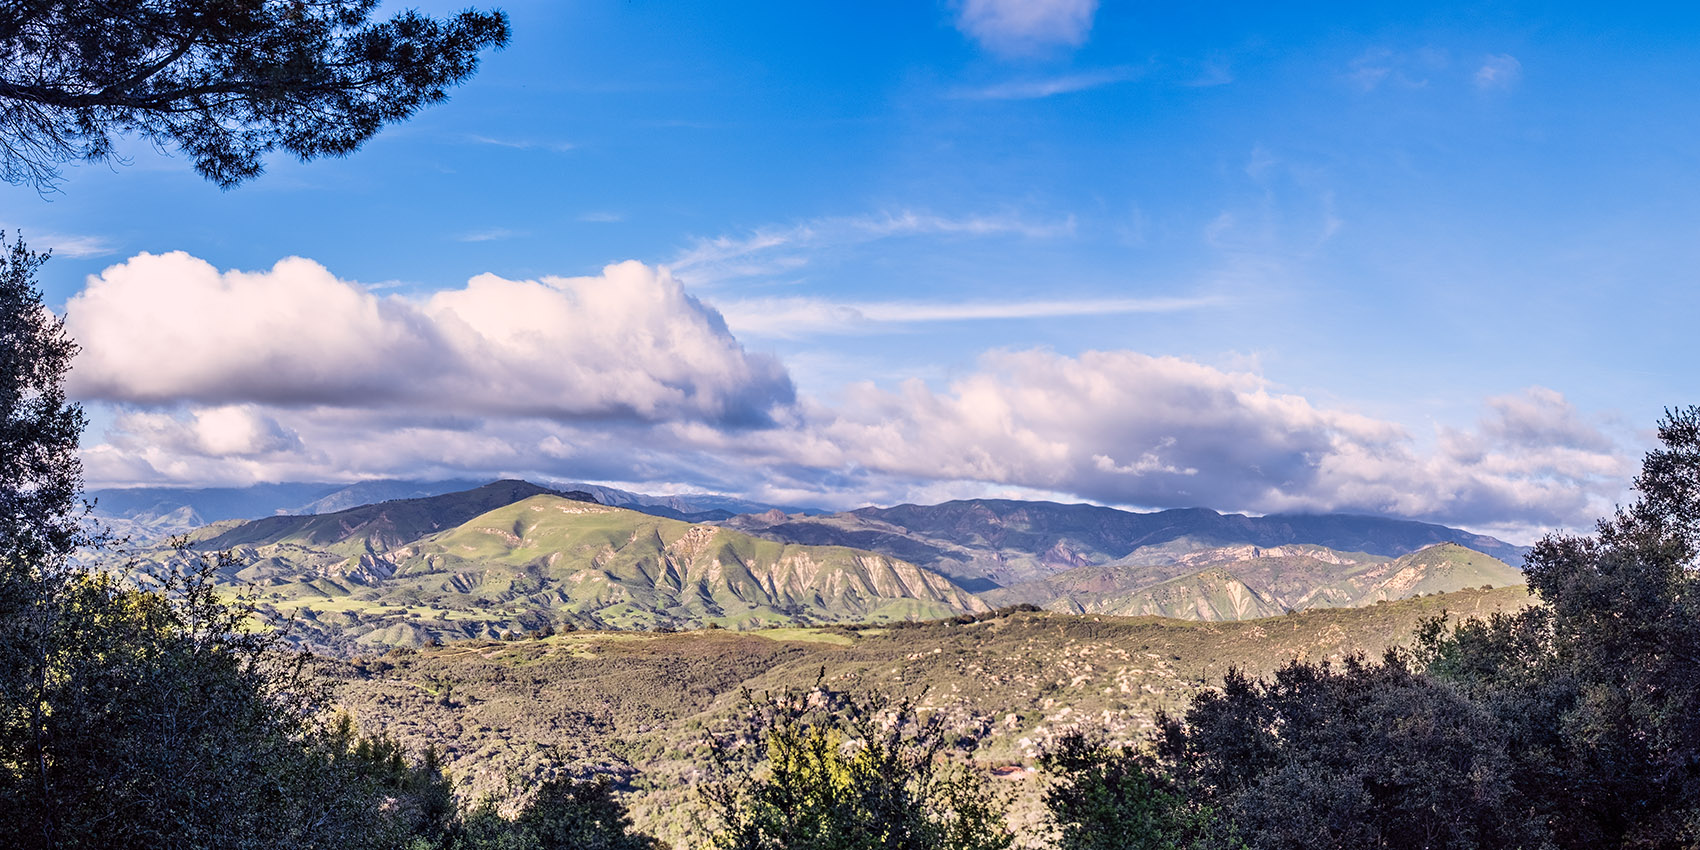 Panorama taken from Upper Vista Point off San Marcos Pass Road on our way to Santa Barbara